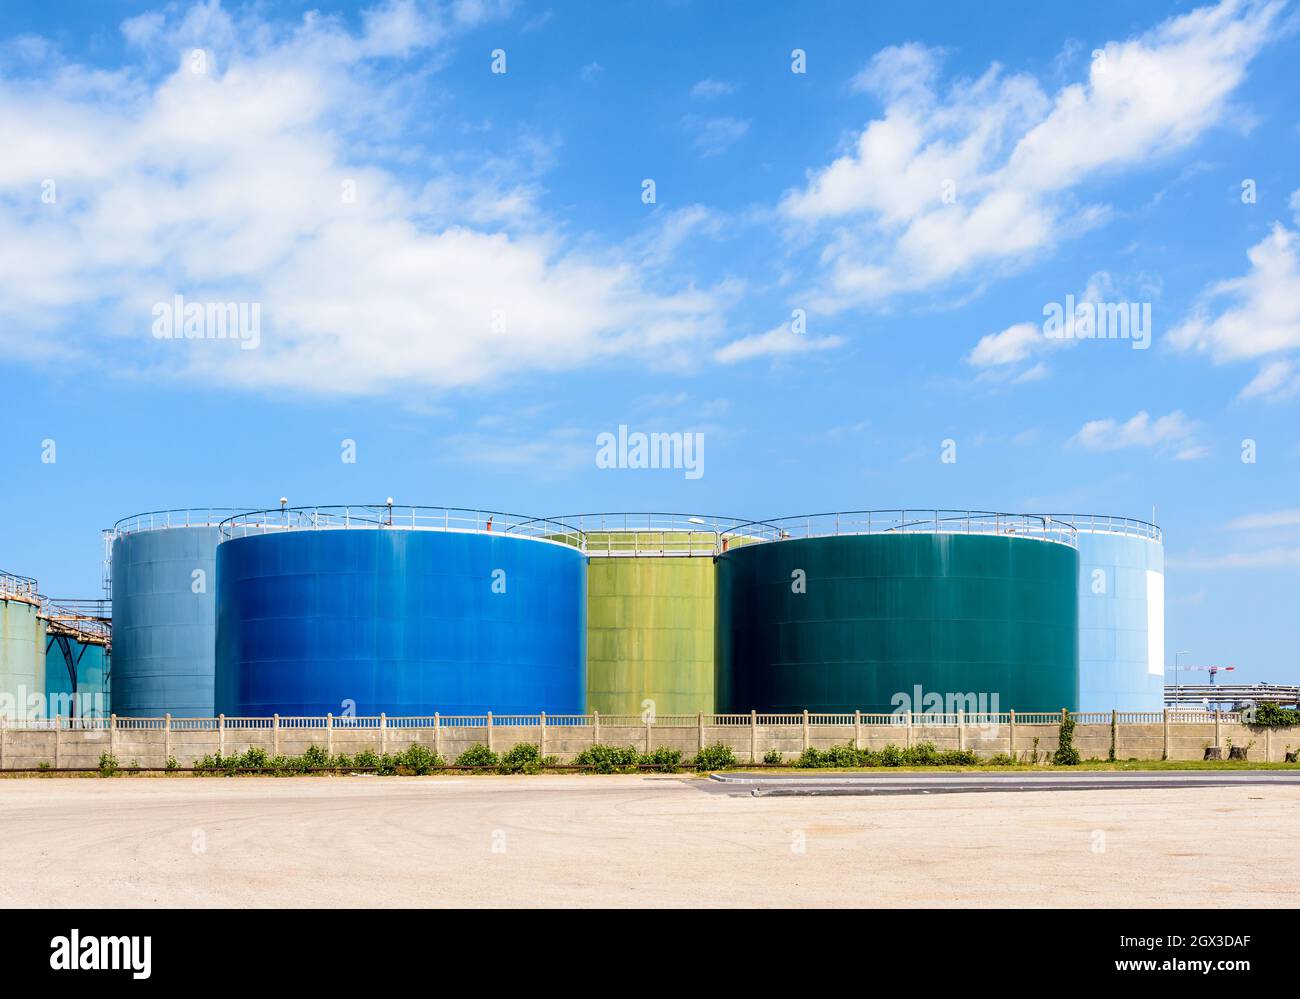 Large coloured storage tanks for oil and fuel in a tank farm under a blue sky with white clouds. Stock Photo